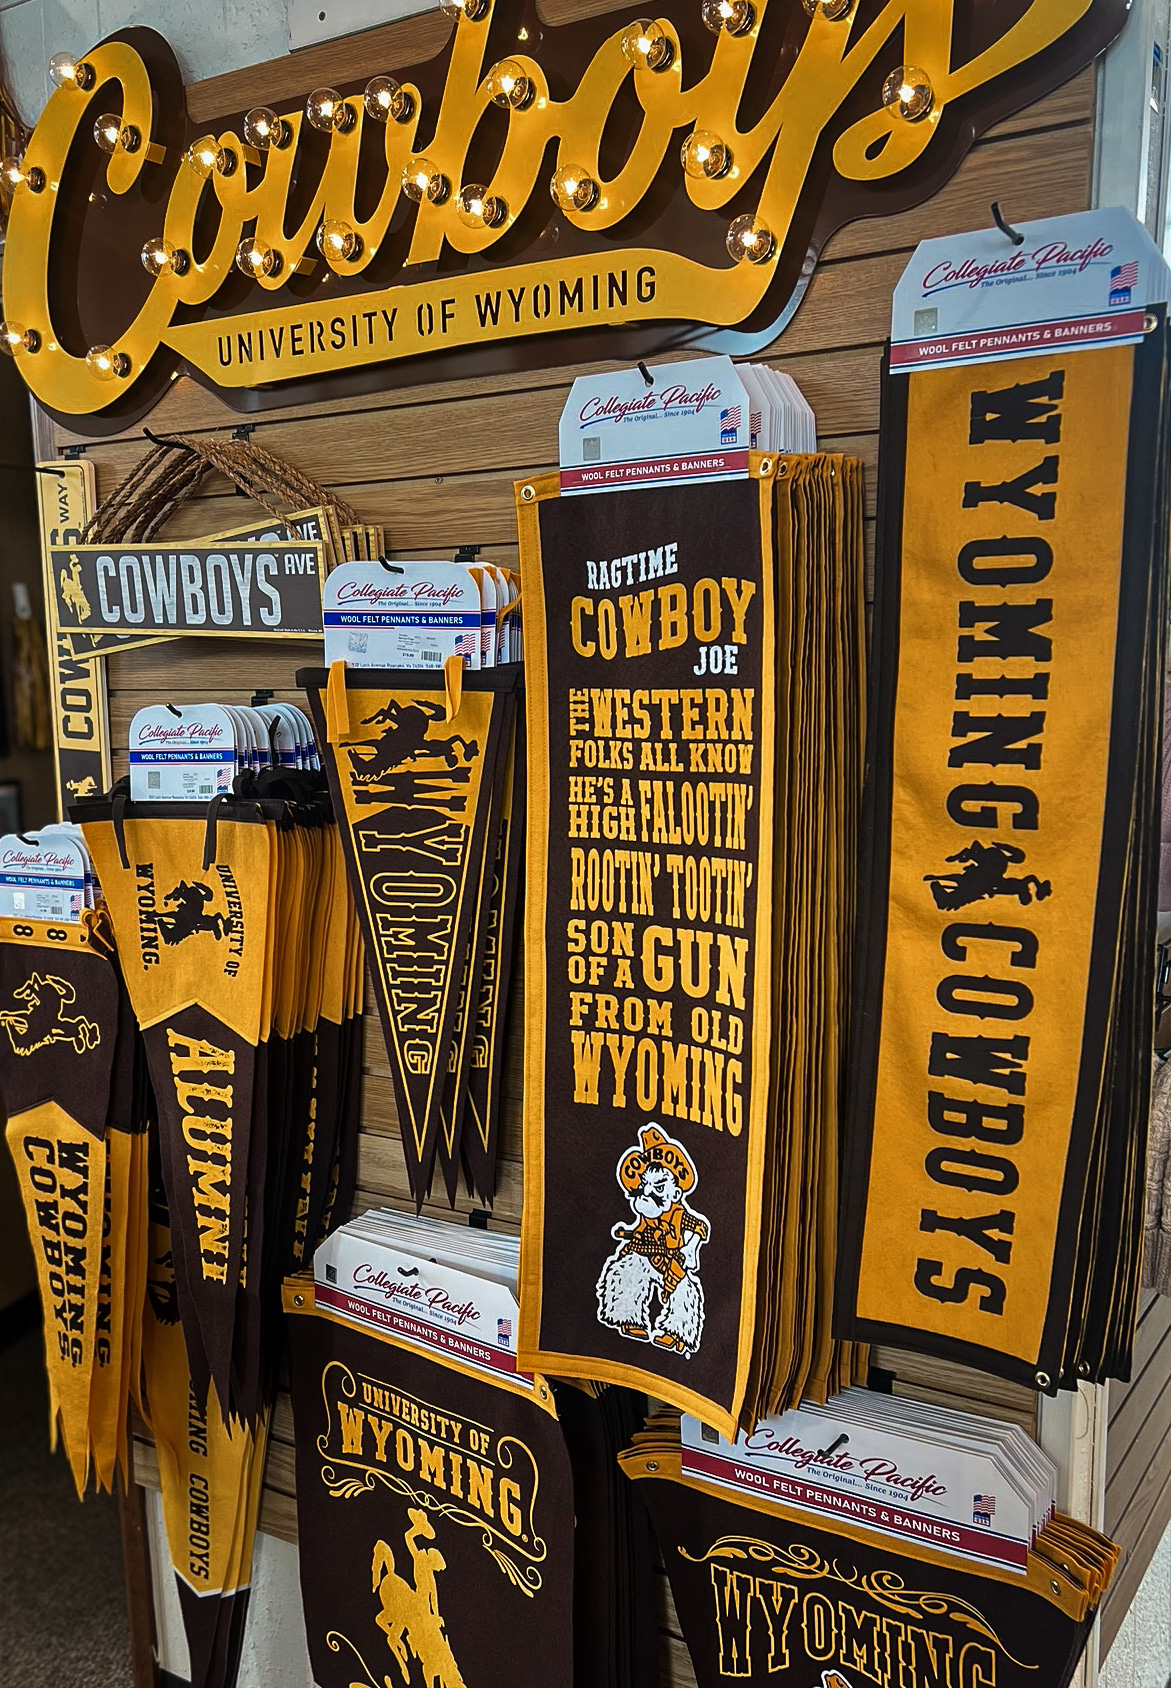 A display case of various novelty brown & gold gear